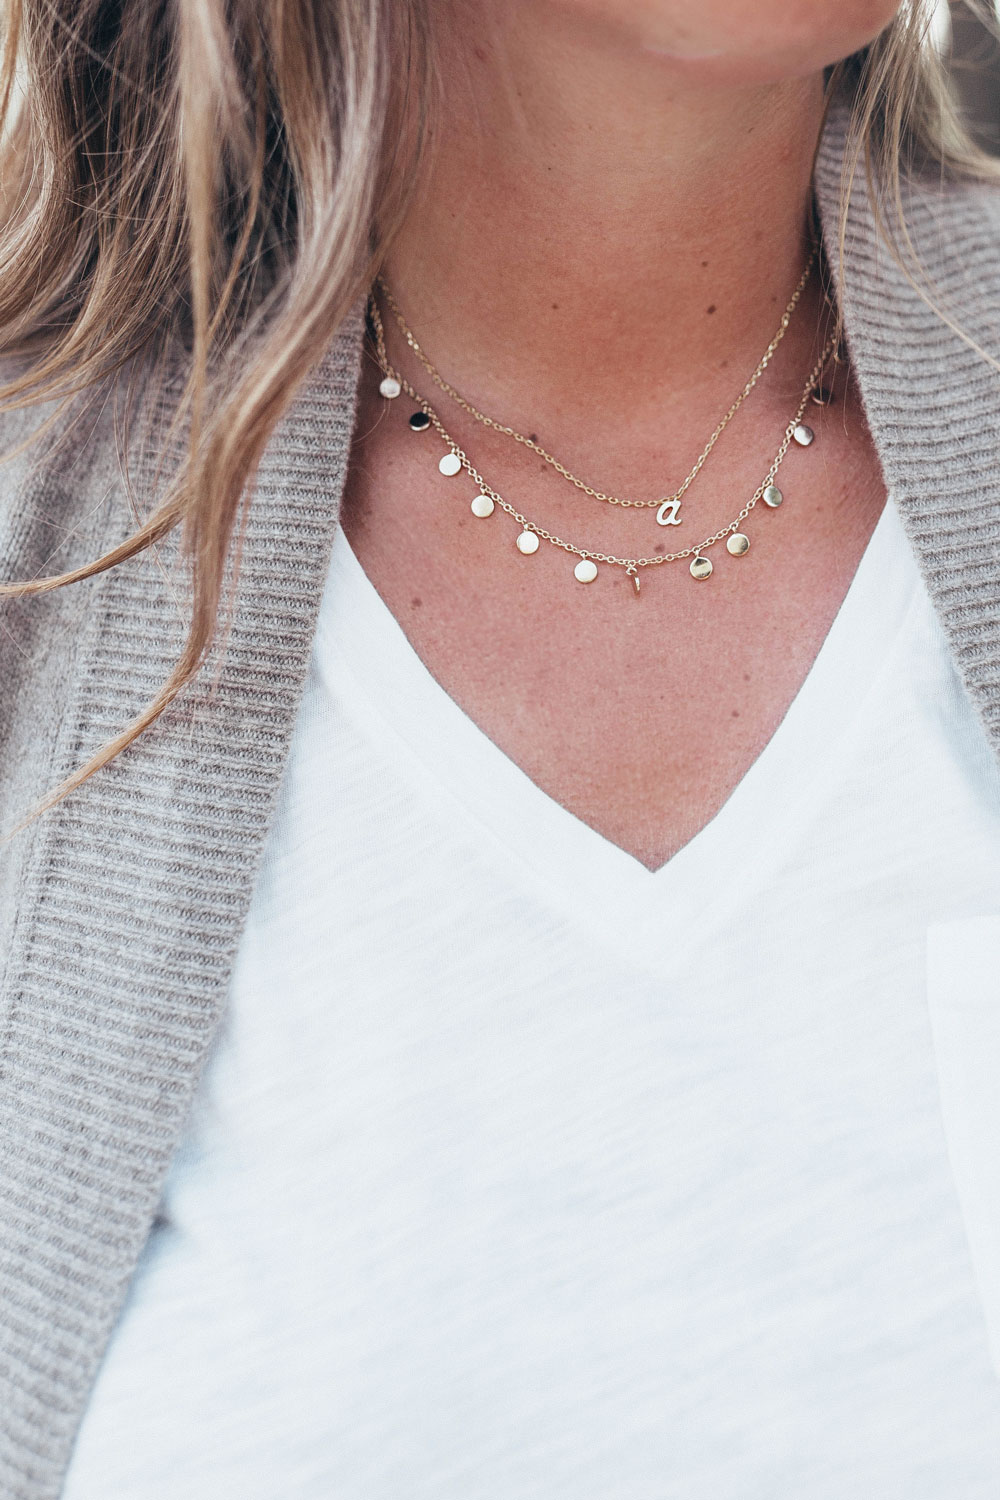 Layered dainty necklaces